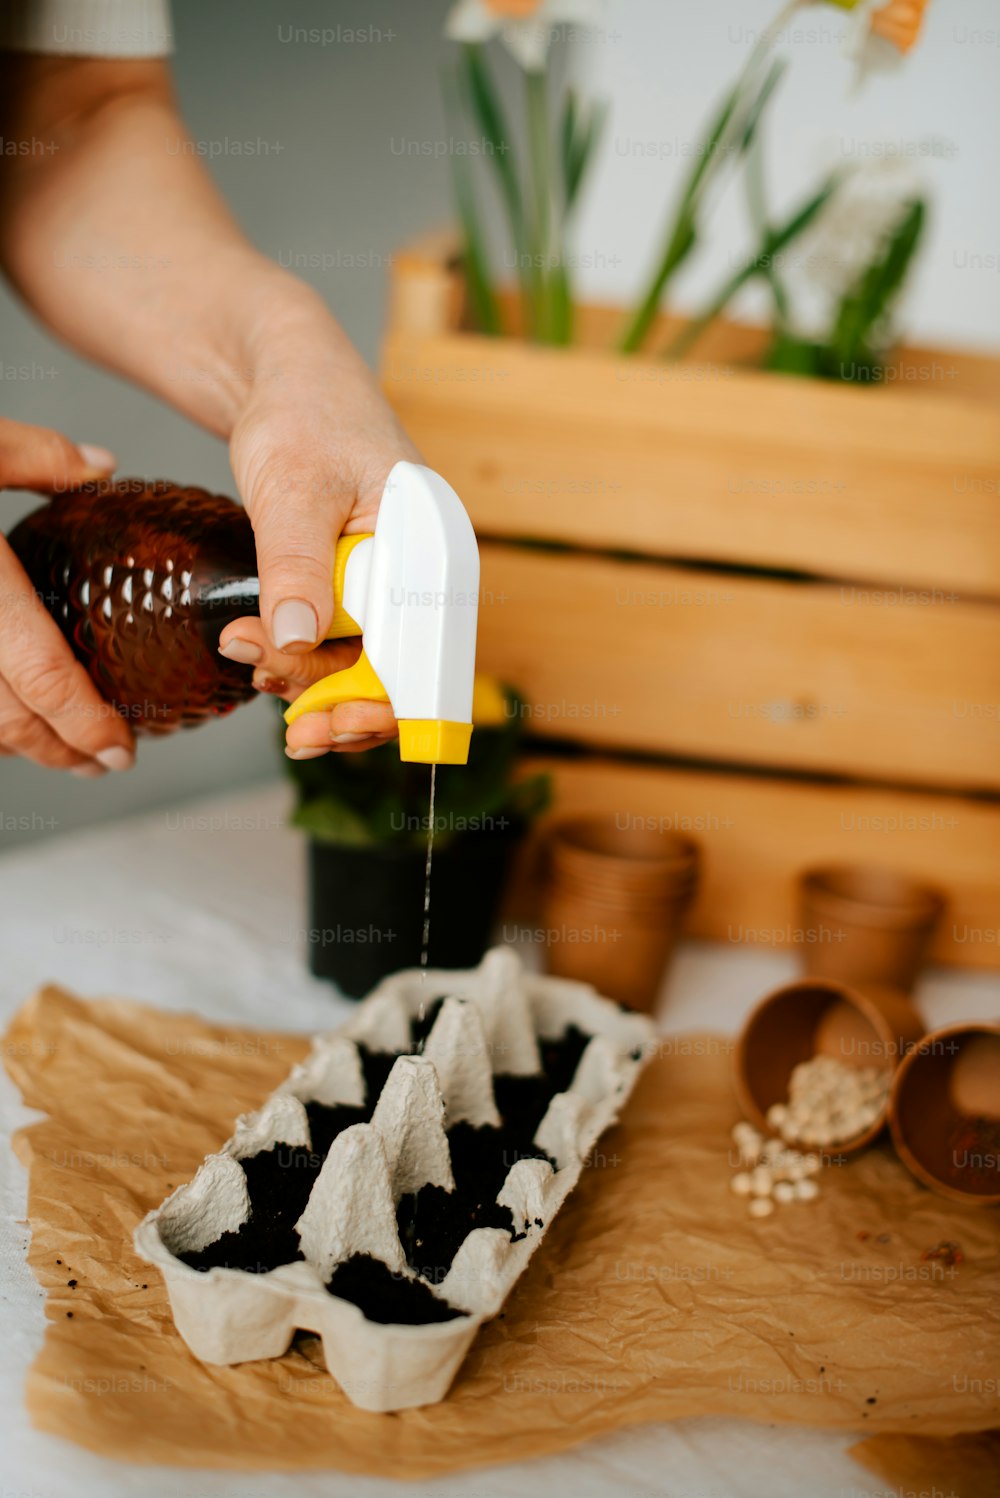 a person is sprinkling a chocolate egg with a yellow and white sprin